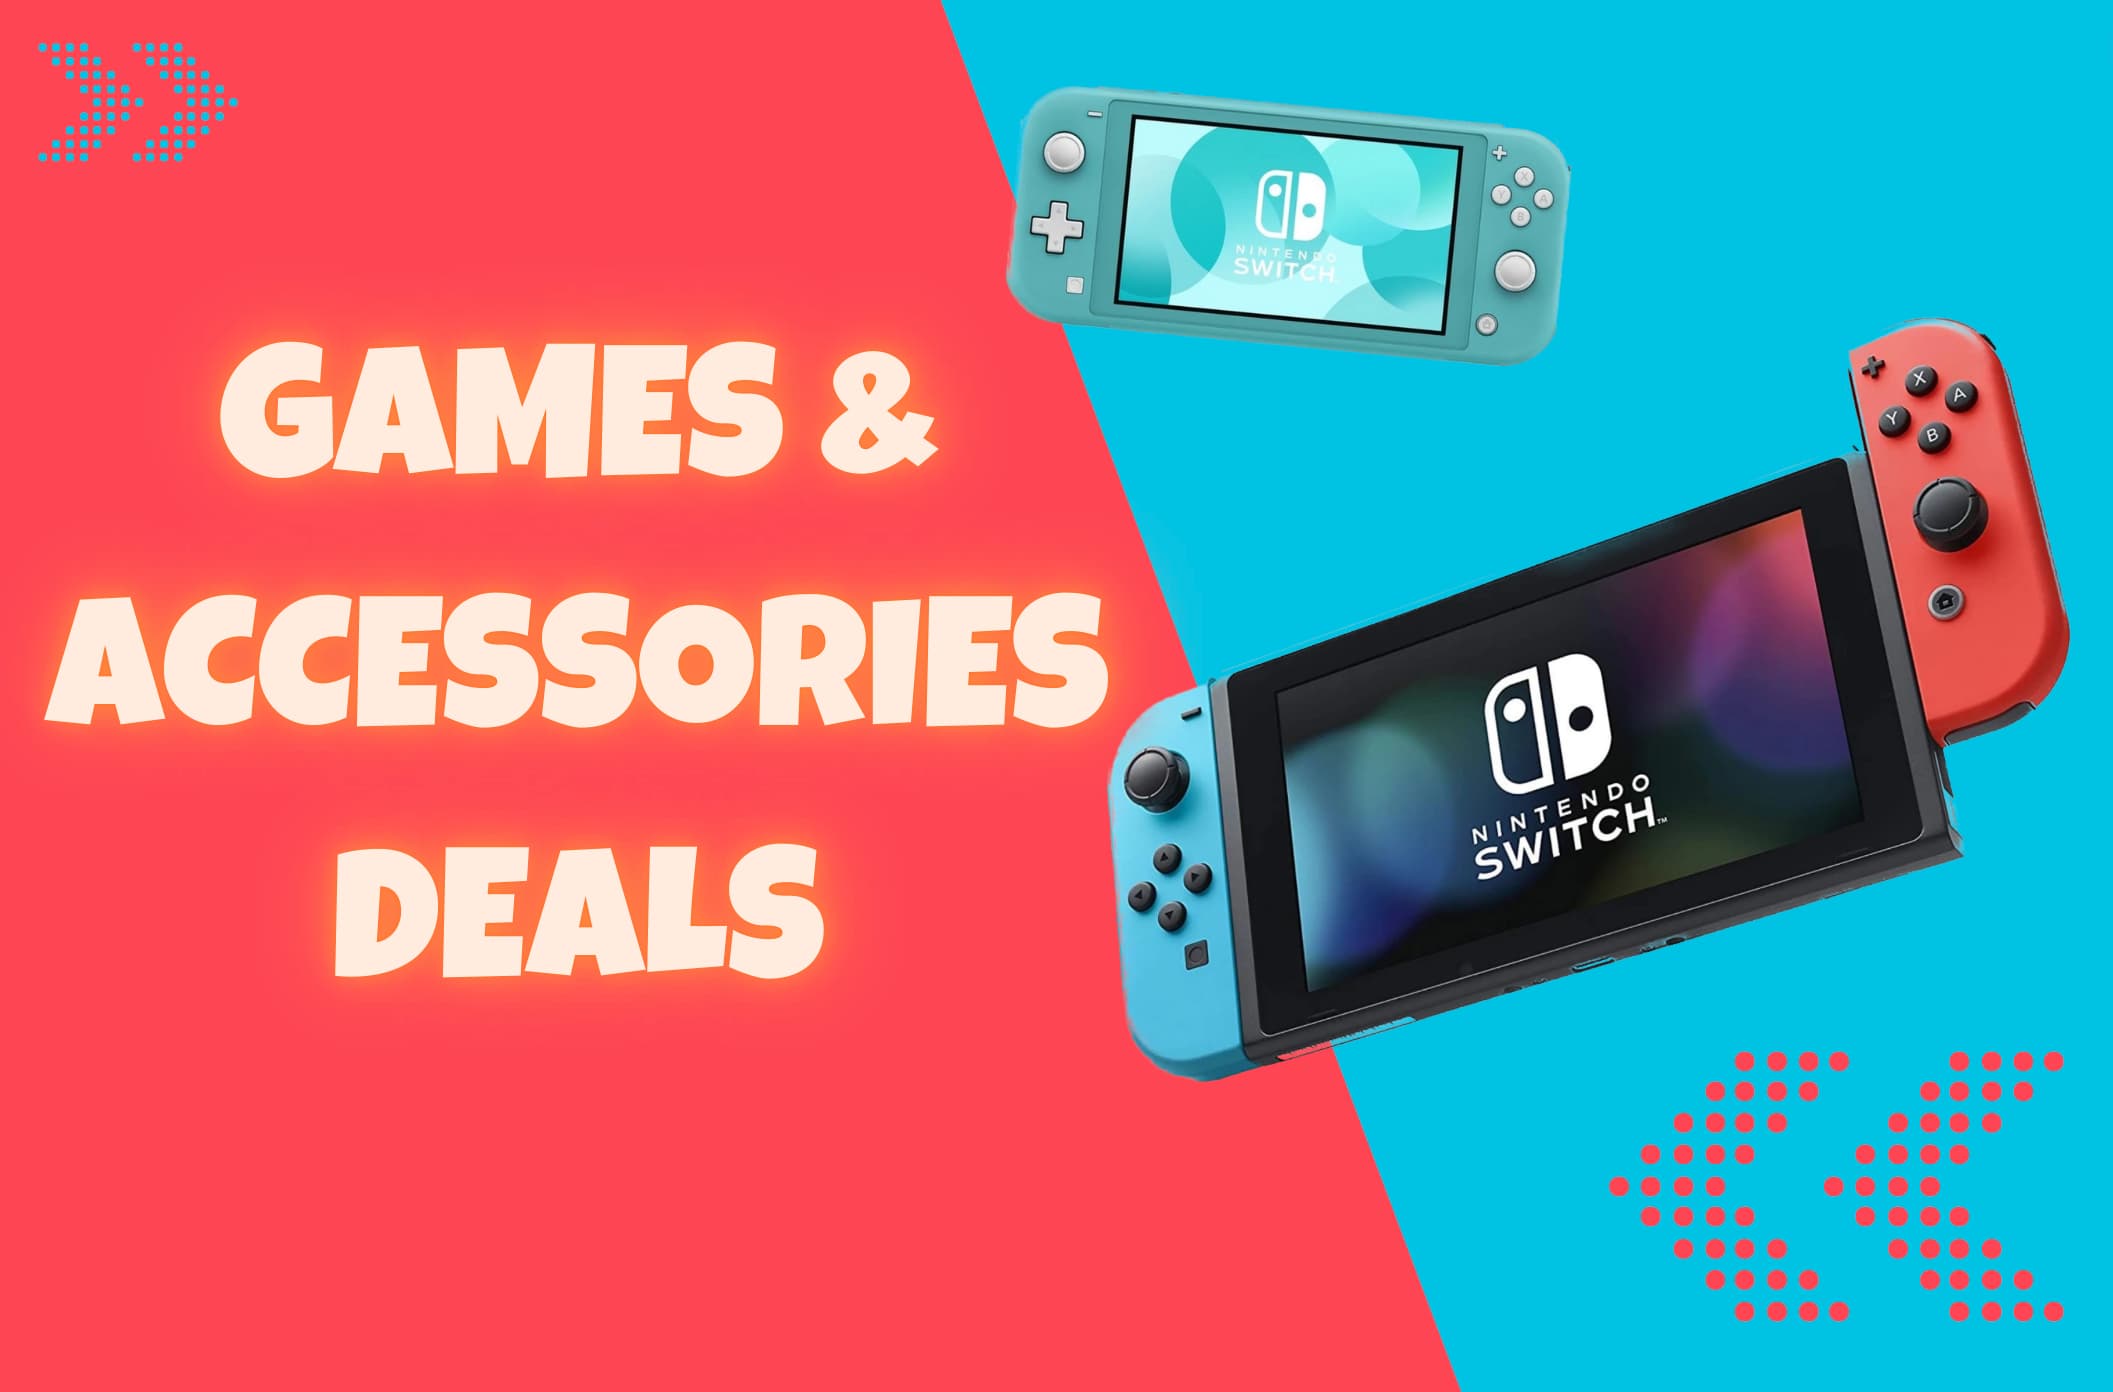 Don’t miss out on these sick Nintendo Switch deals